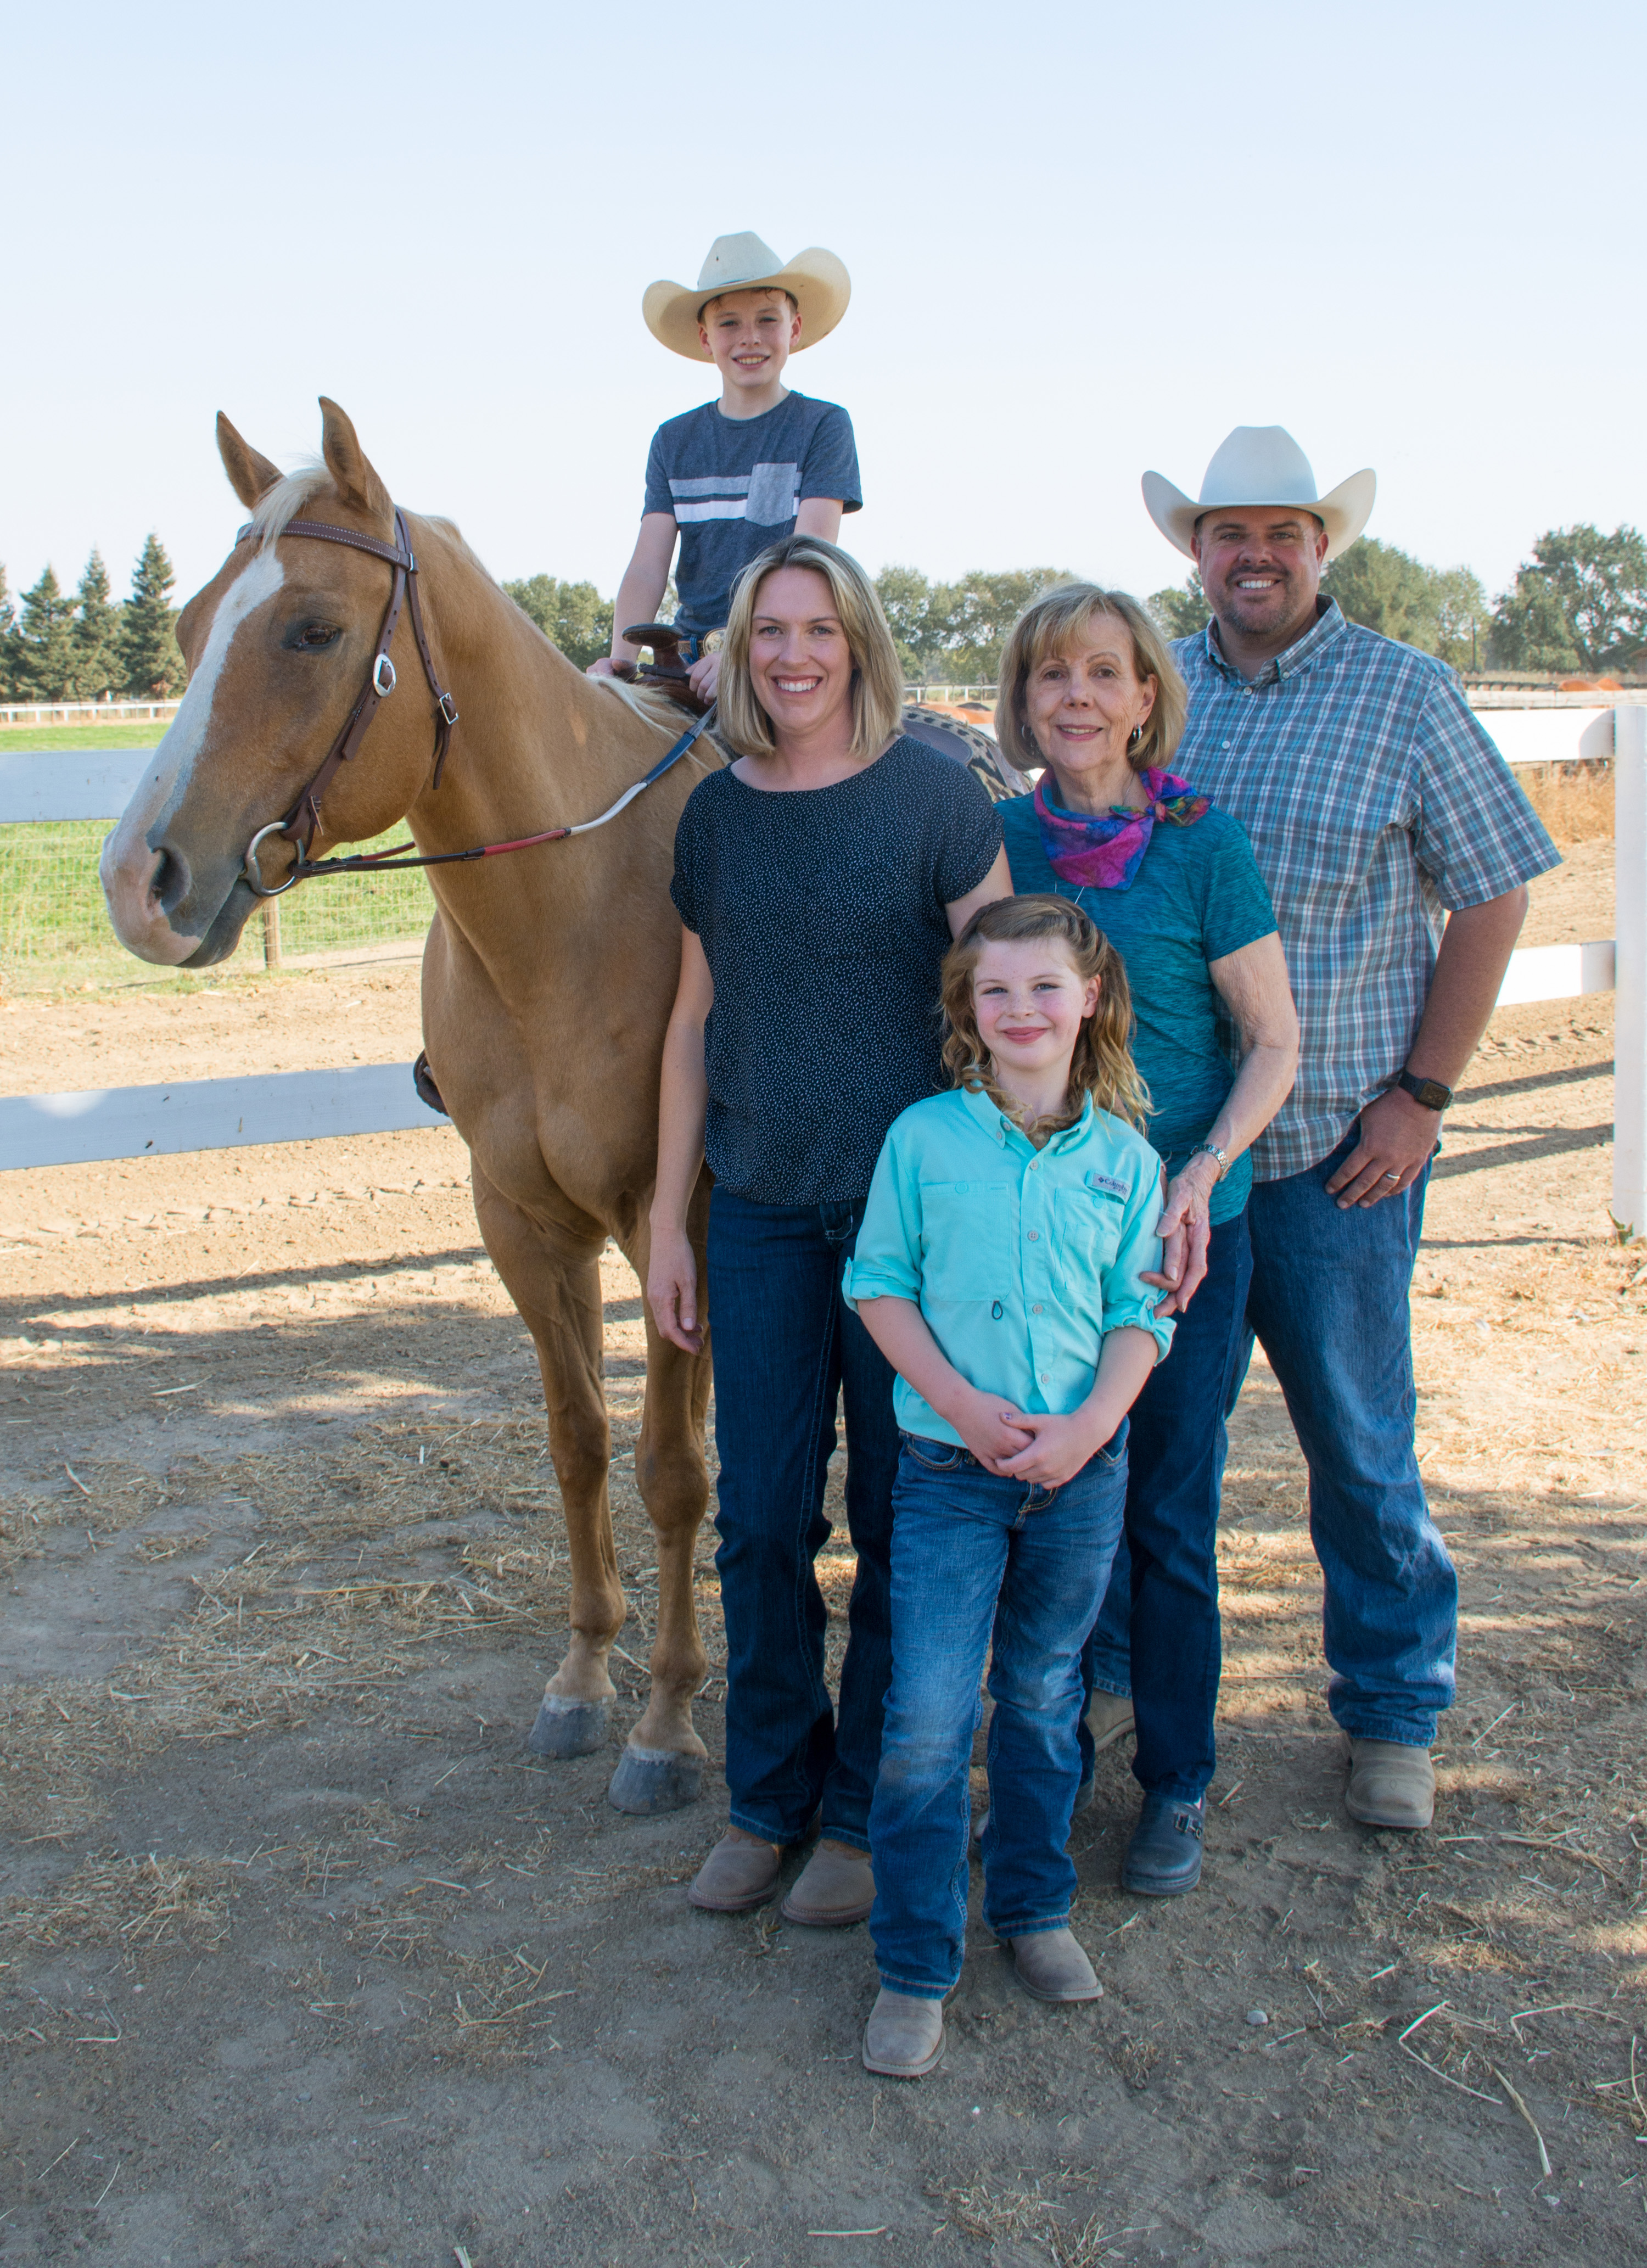 Justin and Julia Daehling and family at Daehling Ranch Thoroughbreds Elk Grove, California